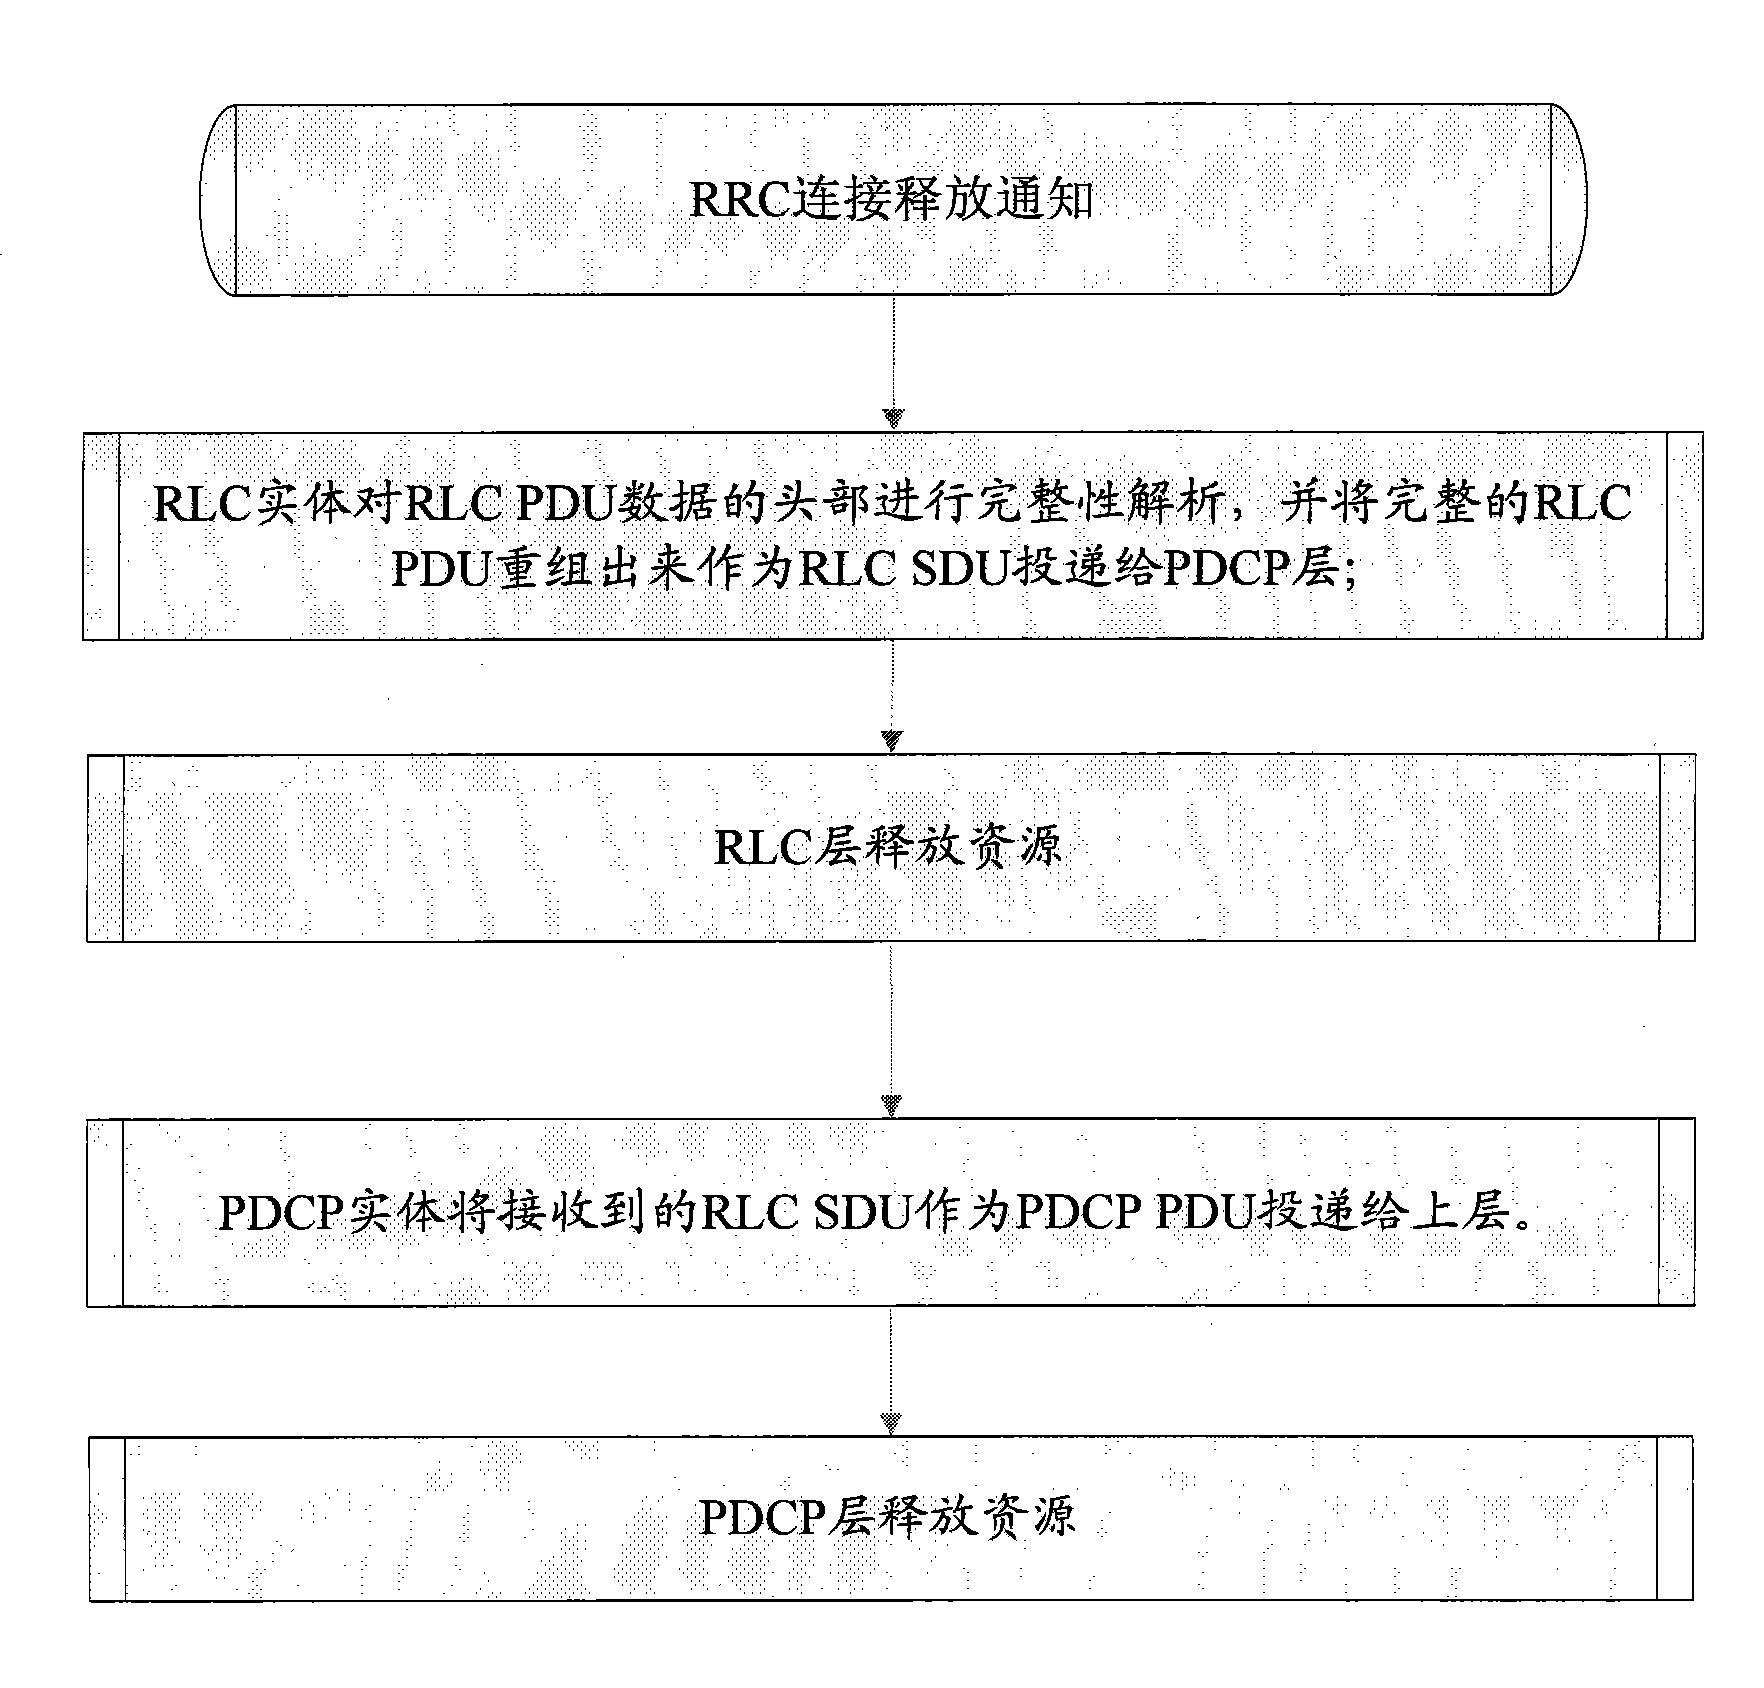 Method for processing data of RLC layer and PDCP layer when RRC connection is released under LTE system